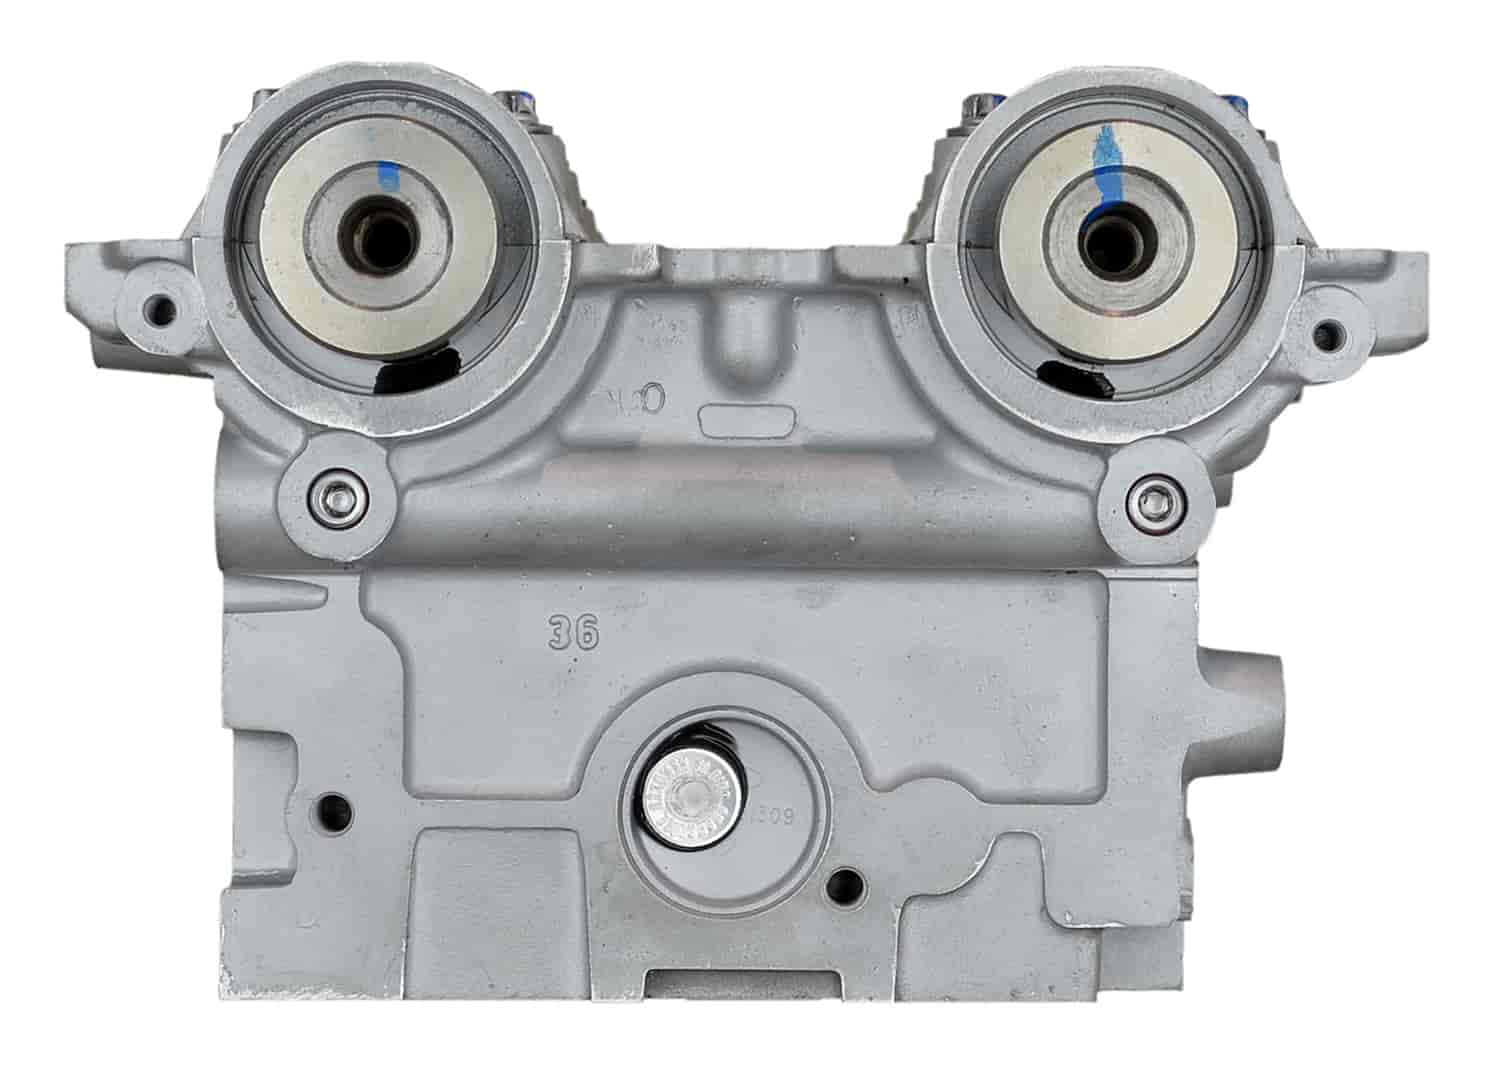 Remanufactured Cylinder Head for 2000-2004 Ford/Mazda with 2.0L L4